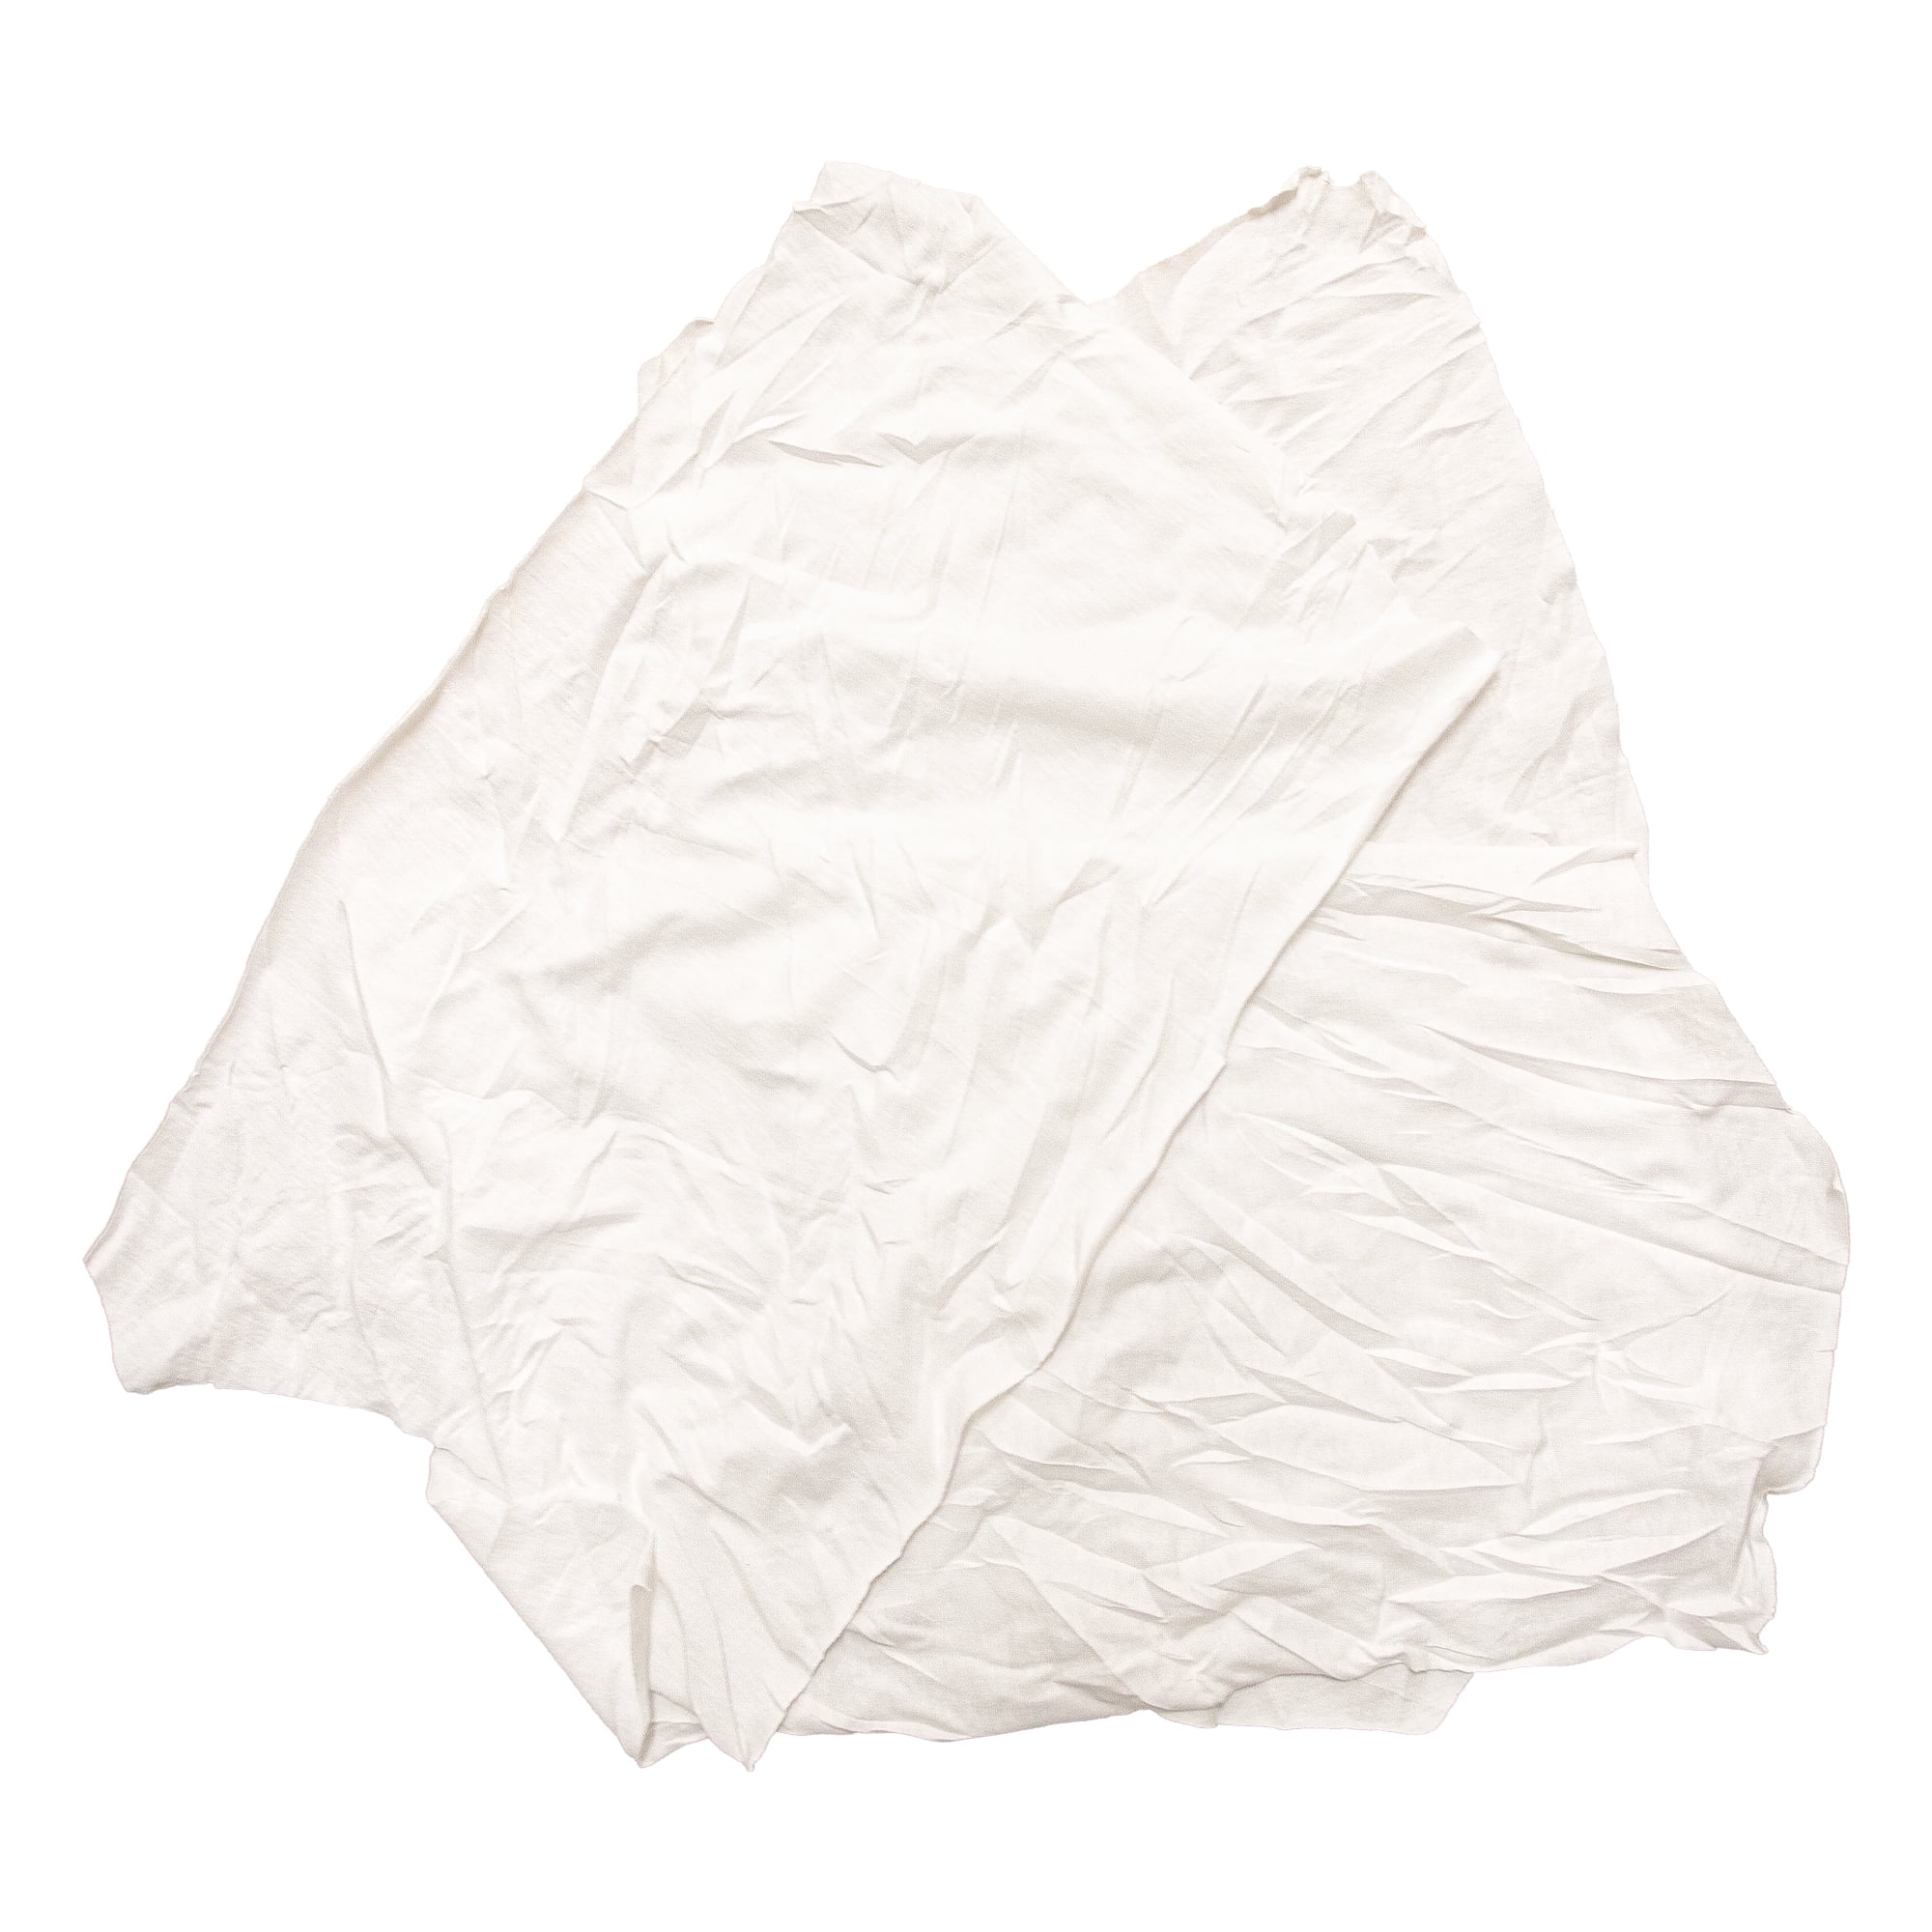 New White T-shirt Knit Wiping Cloths – All Rags